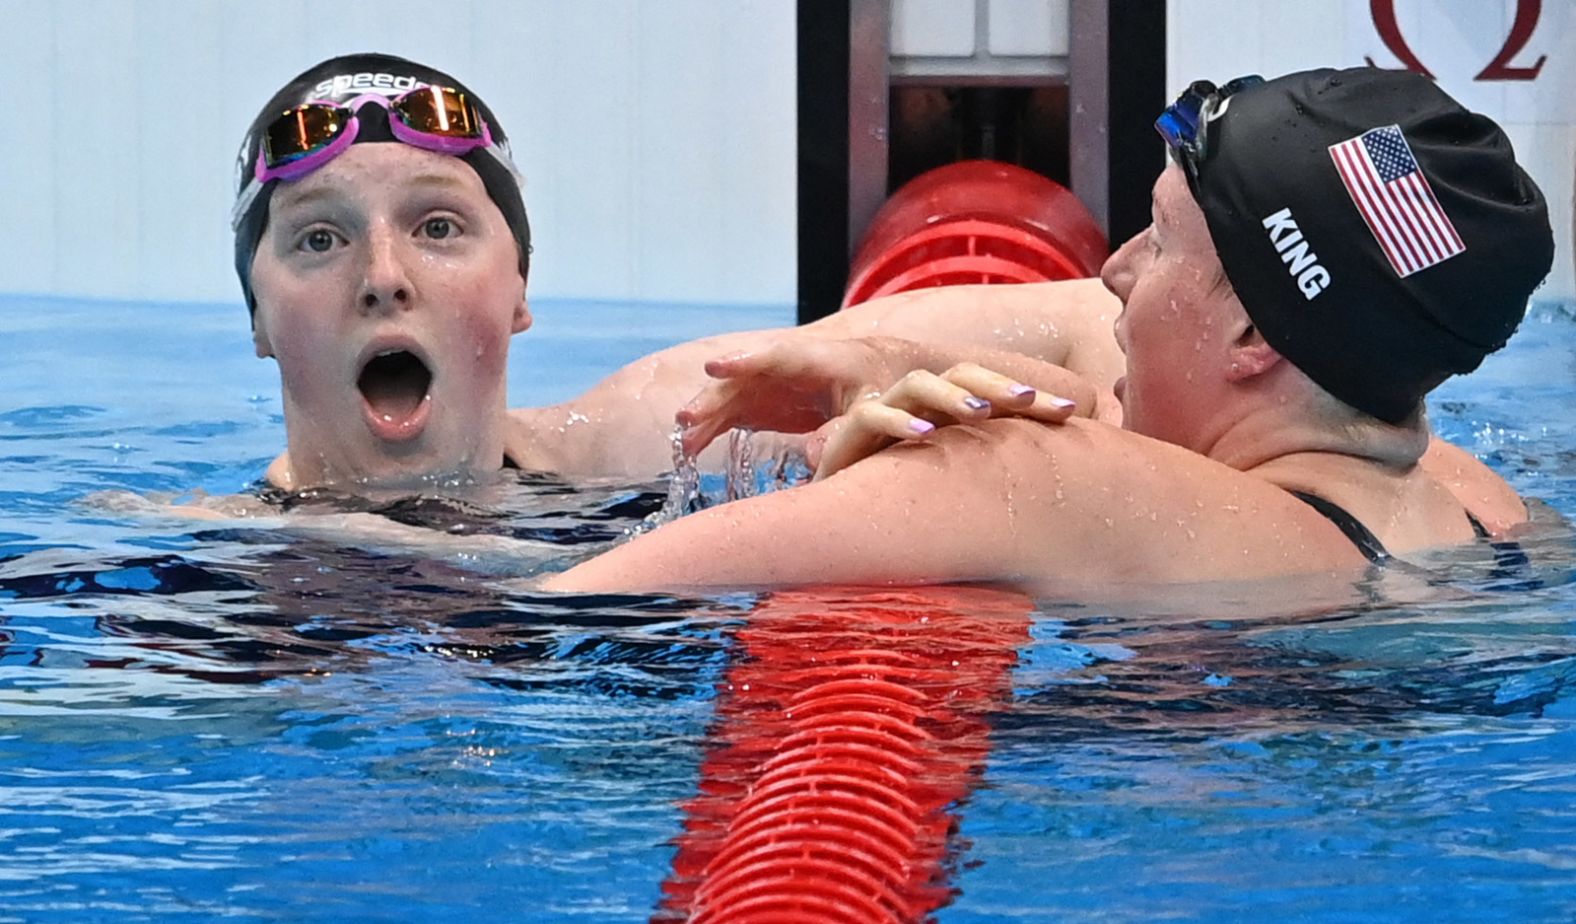 Lydia Jacoby, left, is congratulated by fellow American swimmer Lilly King after <a href="index.php?page=&url=https%3A%2F%2Fwww.cnn.com%2Fworld%2Flive-news%2Ftokyo-2020-olympics-07-26-21-spt%2Fh_8b08f43fae7fd1862ec3443ea9a91f9c" target="_blank">winning the 100-meter breaststroke</a> on July 27. Jacoby, 17, is the first-ever Olympic swimmer from Alaska, and she was not expected to win the event. King, a race favorite who won the event at the 2016 Olympics, finished with the bronze this time.